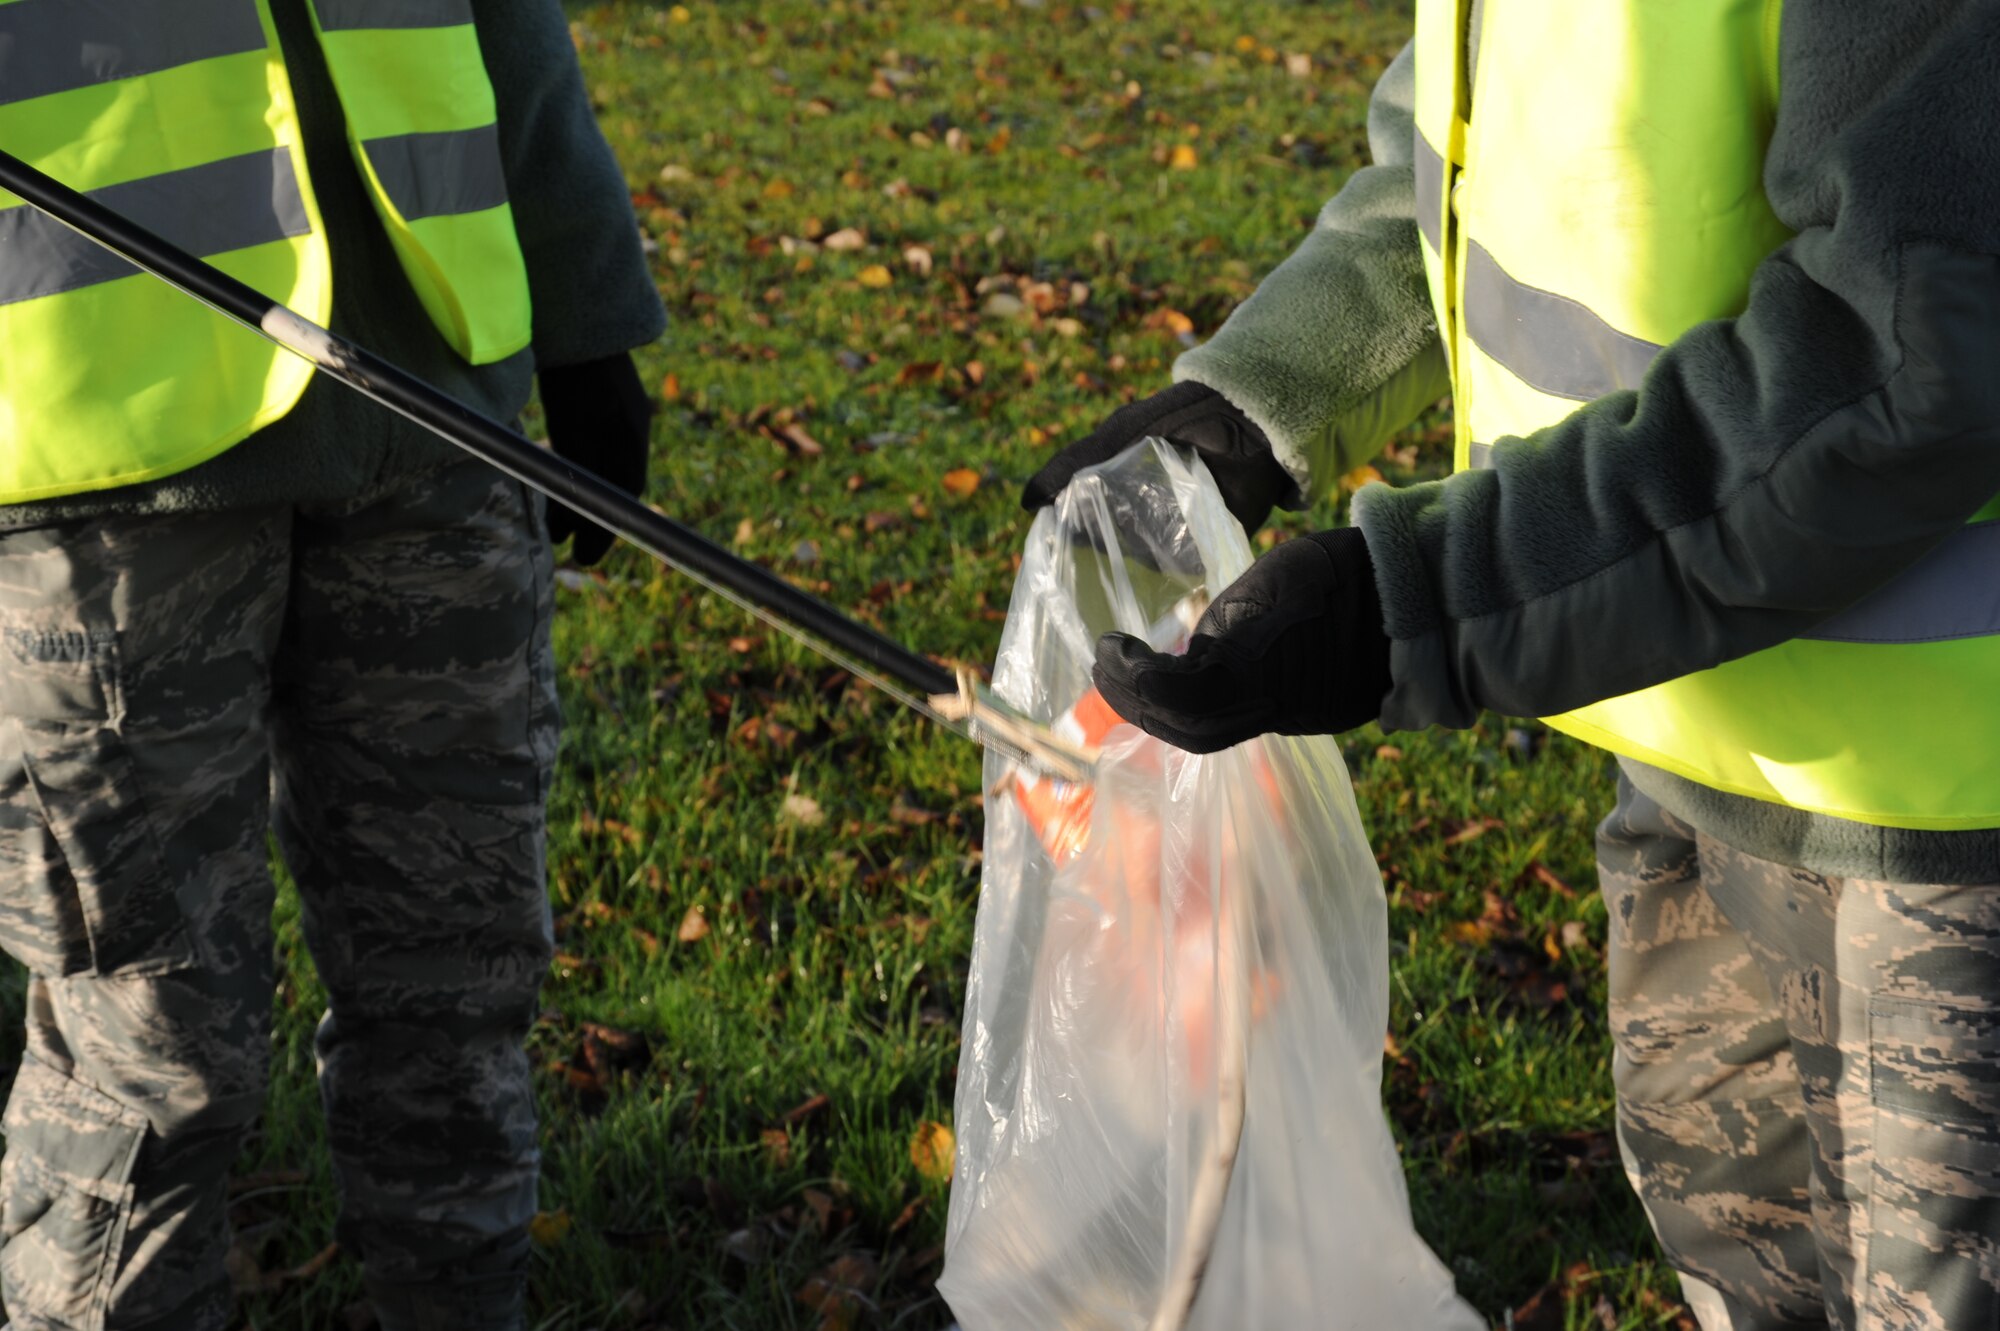 SPANGDAHLEM AIR BASE, Germany -- An Airman puts a piece of trash in a trash bag during a morning trash route along Perimeter Road Nov. 25, 2013. Eifel Pride is a year-round program used for base beautification by first-term Airmen. The program also allows the Airmen to attend the many initial appointments and briefings. (U.S. Air Force photo by Airman 1st Class Dylan Nuckolls/Released)